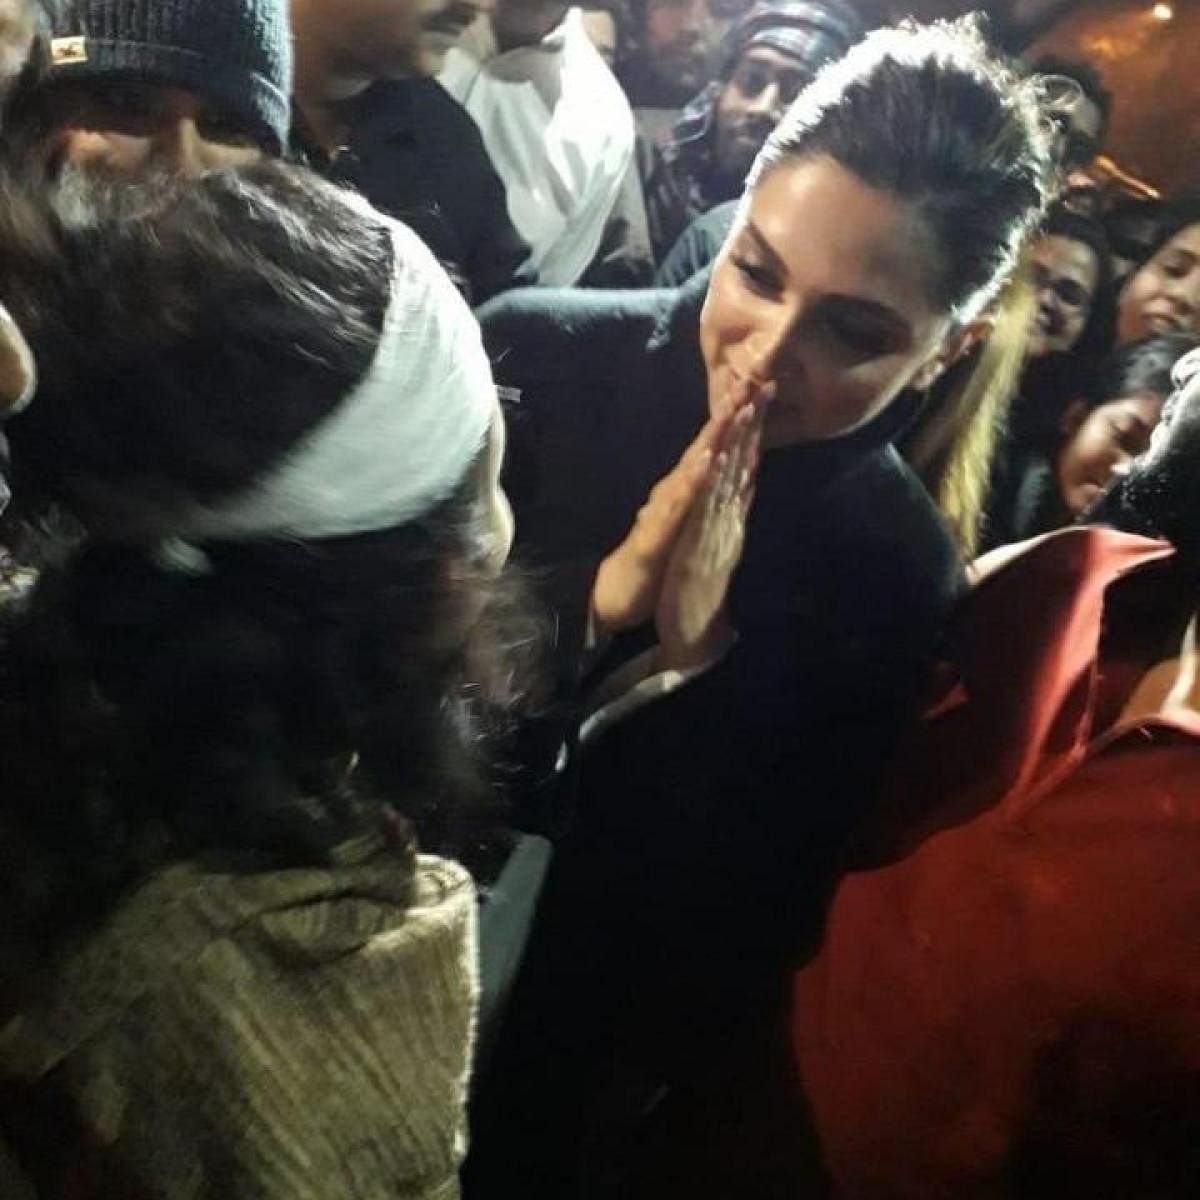 Deepika Padukone visited the JNU campus and joined the agitating students to express her solidarity. Credit: Twitter